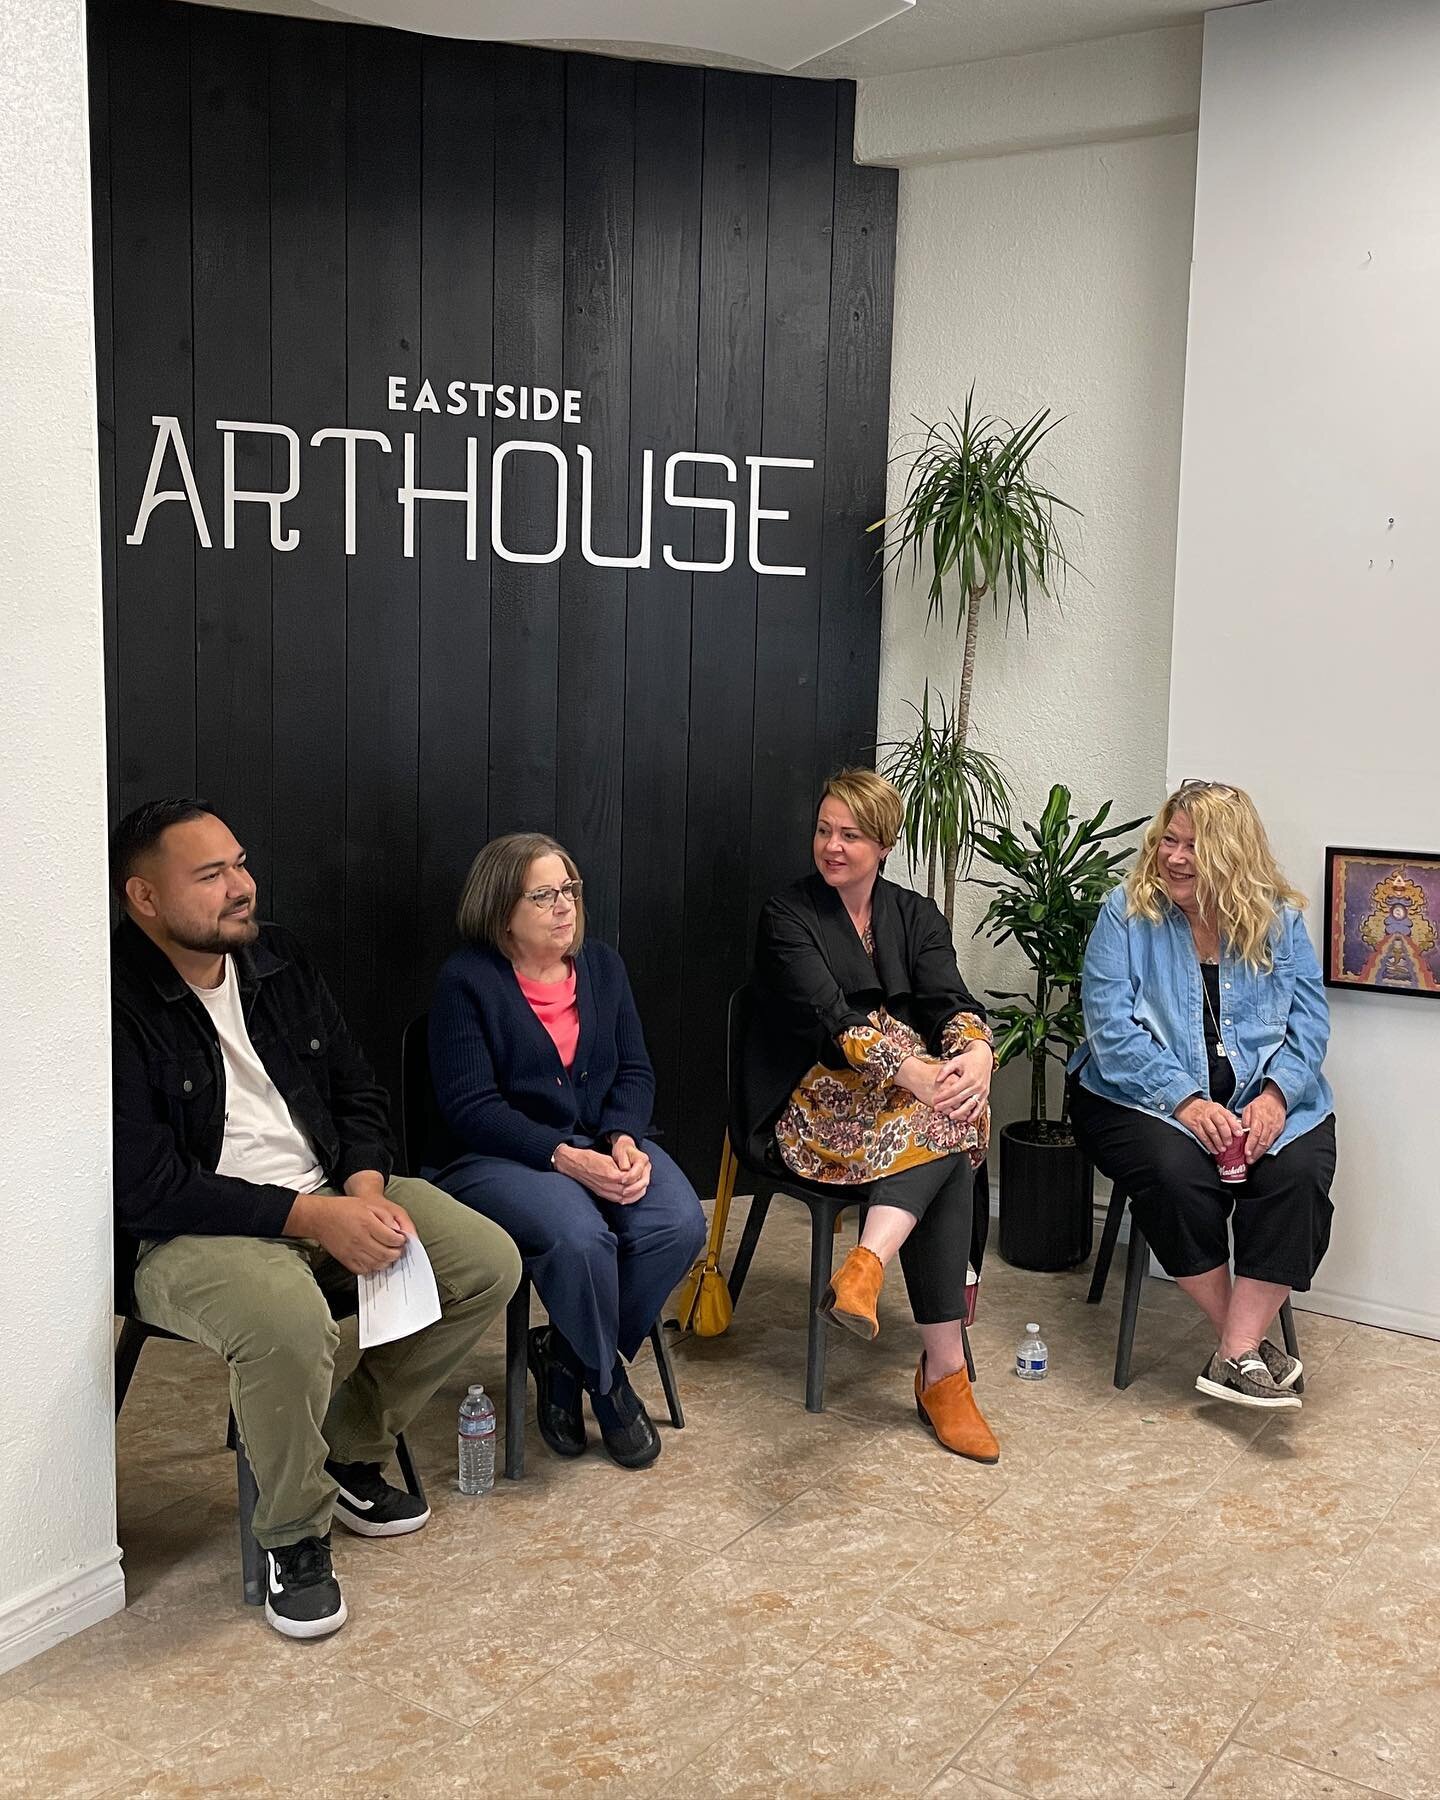 @artsnowriverside hosted a panel featuring Pamela Atkinson, Erin Maroufkhani, Carri Gunn with Juan Navarro as moderator! Speakers shared their experiences and perspectives of Arts education. Special thanks to @kbarth4rusd for putting this together! G